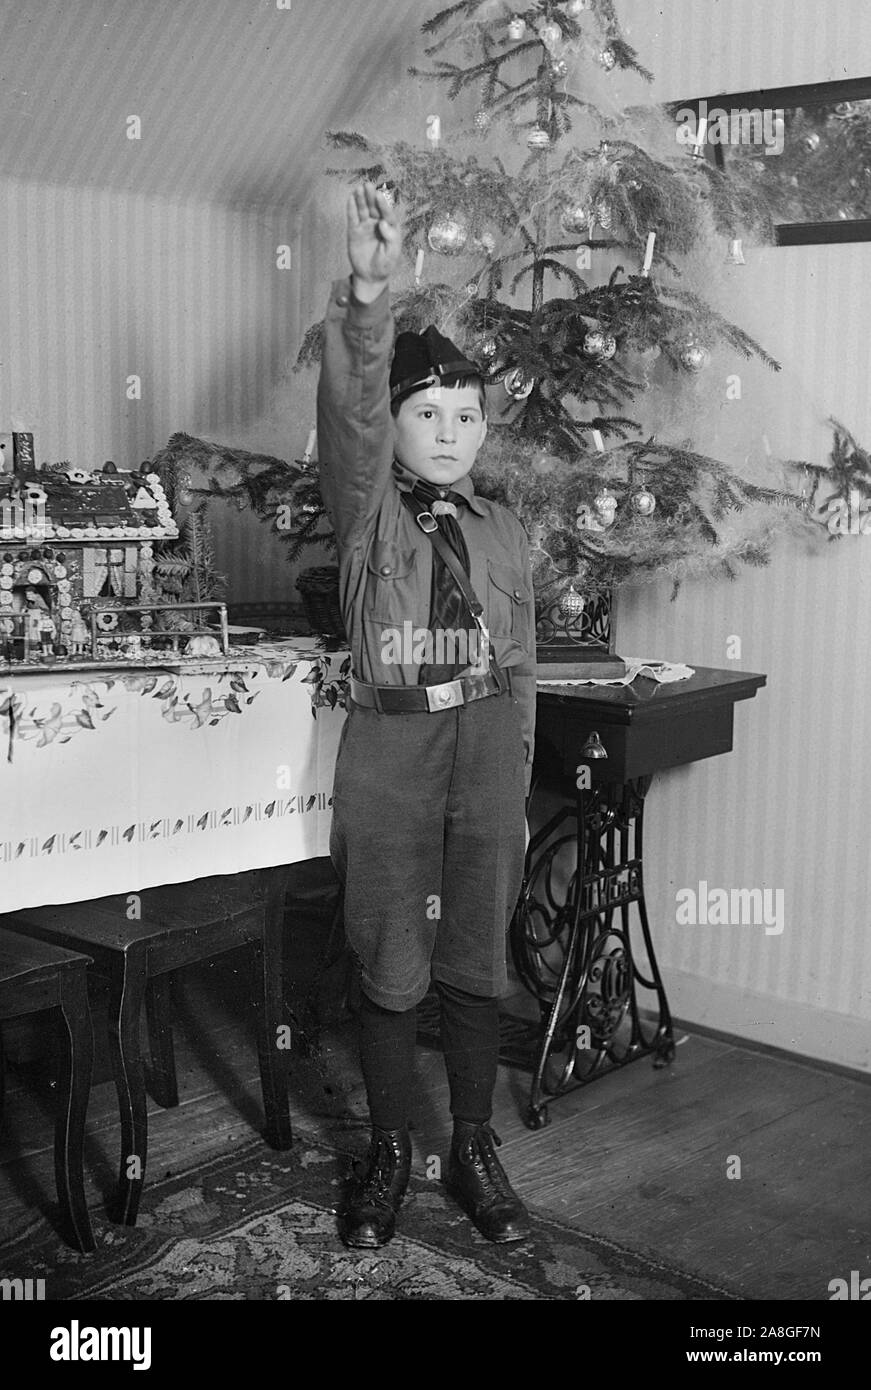 A Hitler youth members stands with a Nazi salute in front of the Christmas tree in 1930s Germany. Stock Photo